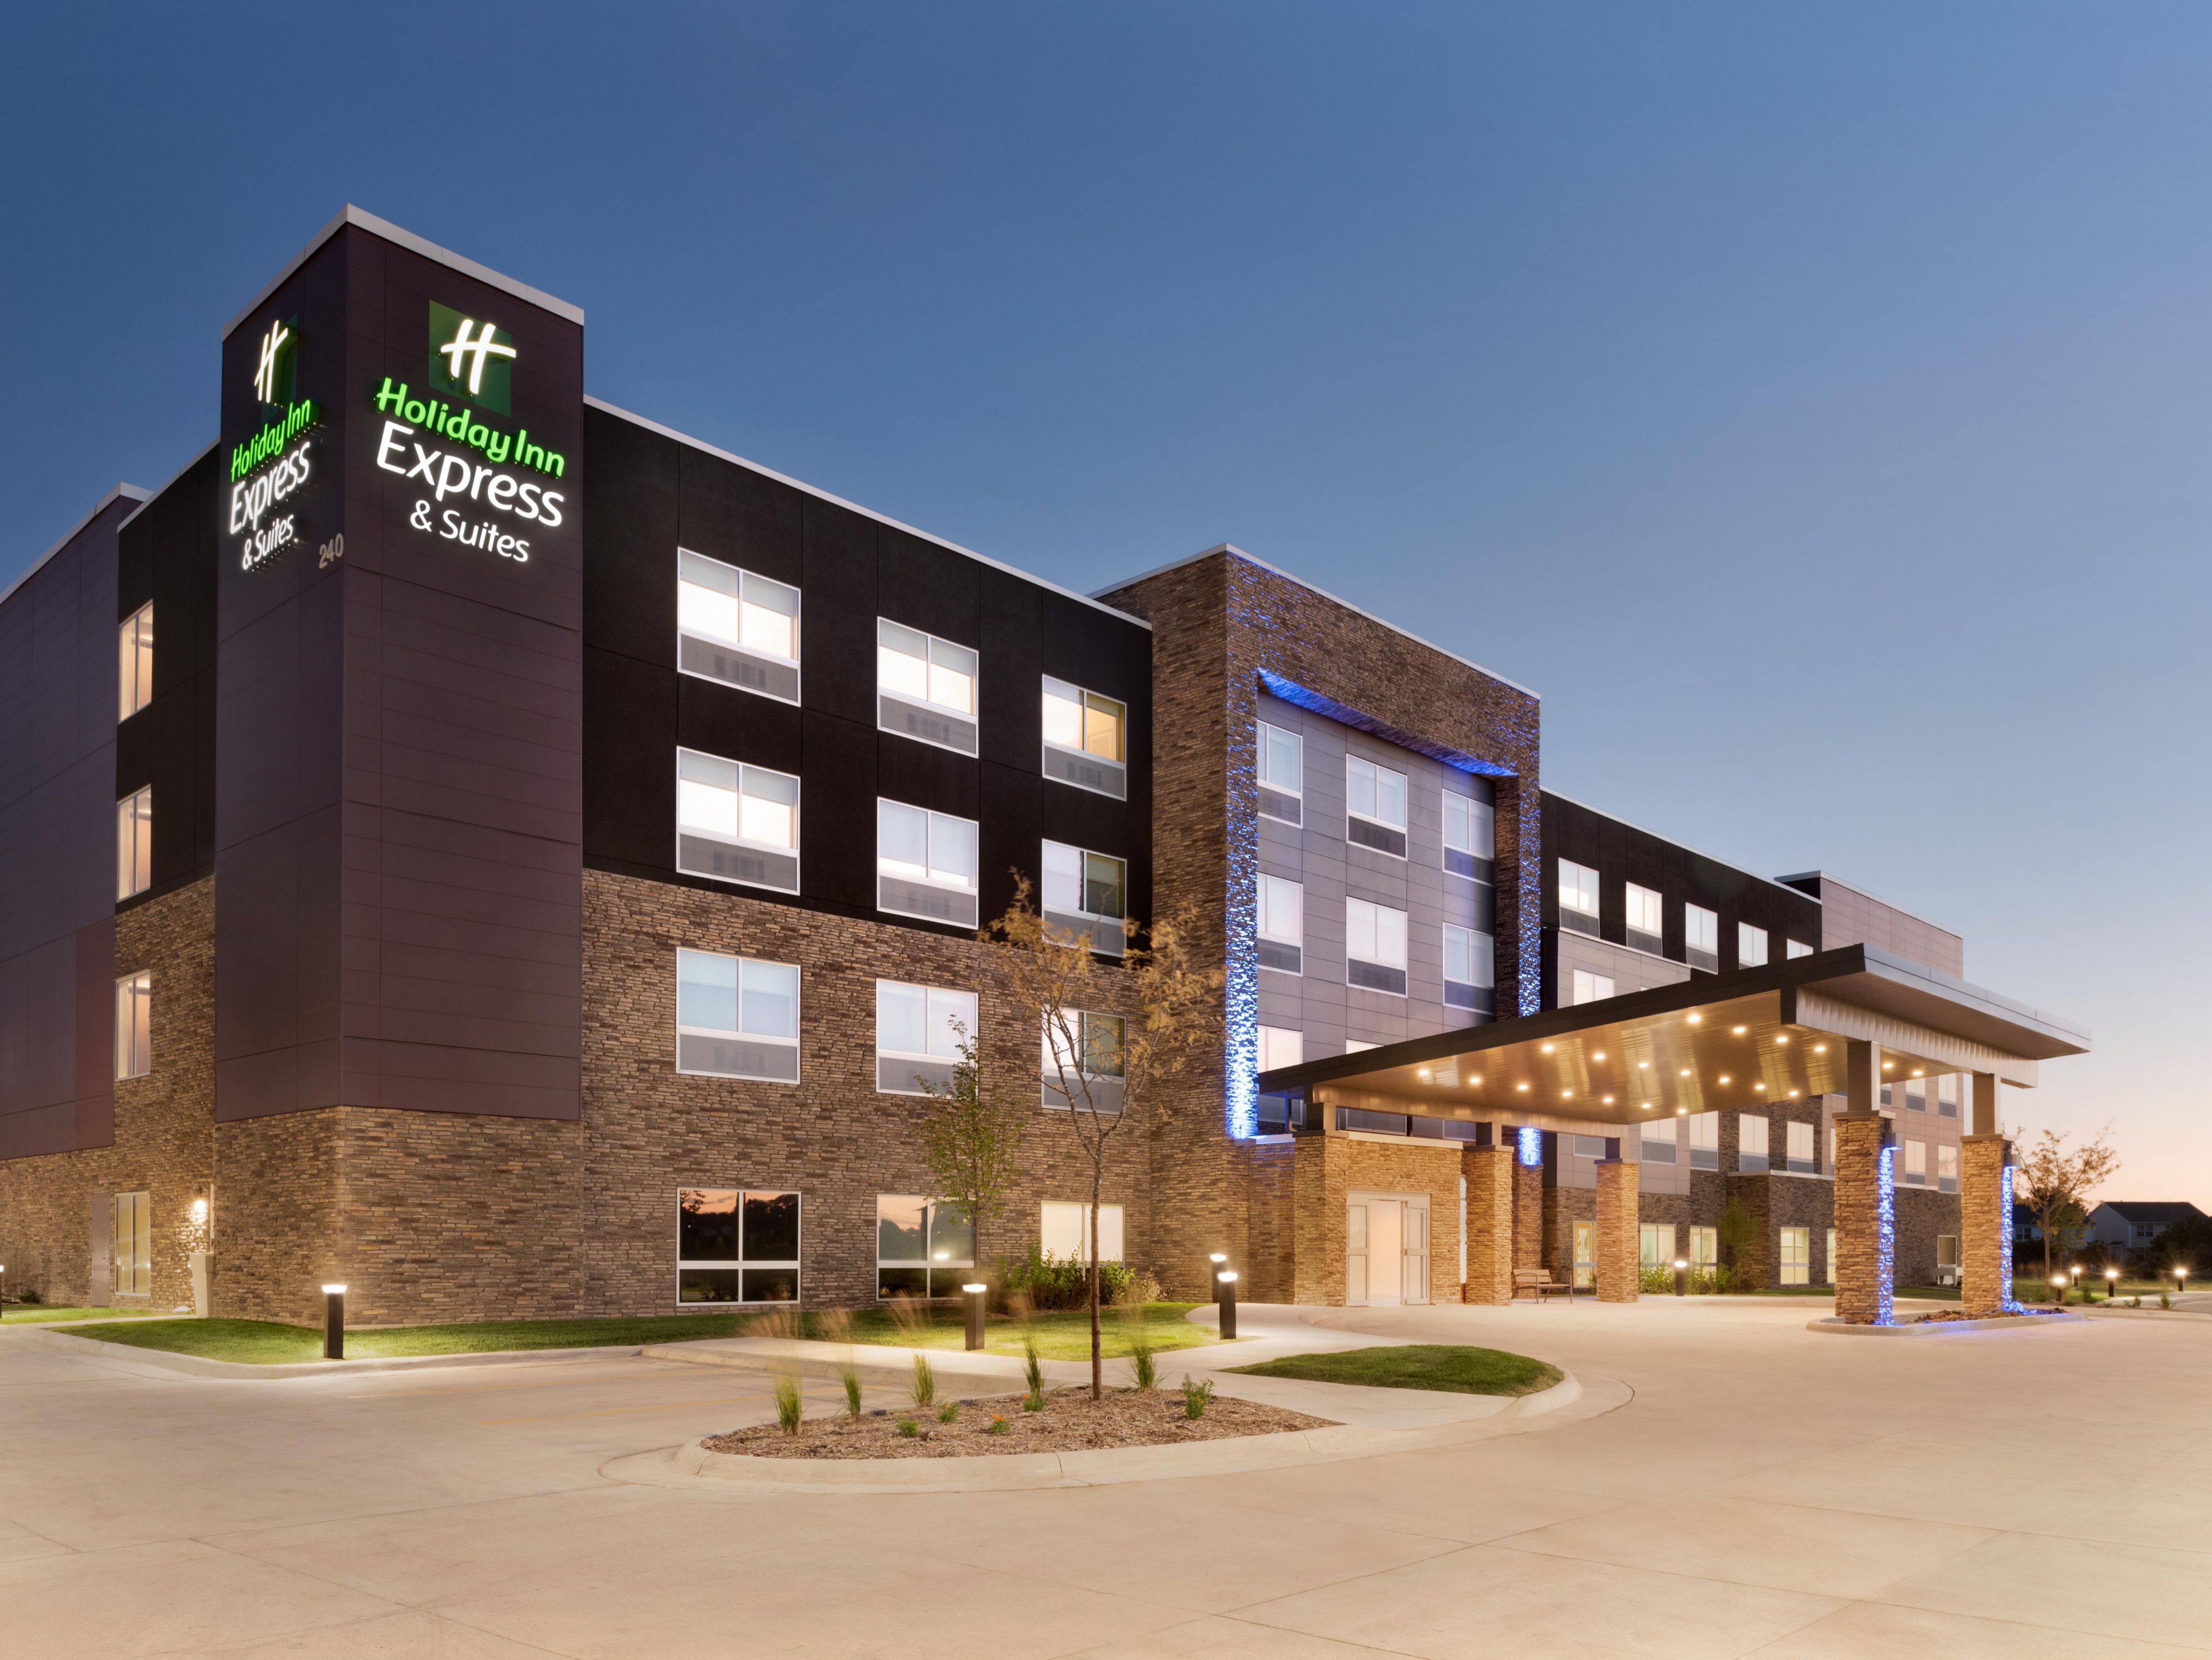 Holiday Inn Express And Suites West Des Moines 5861413594 4x3